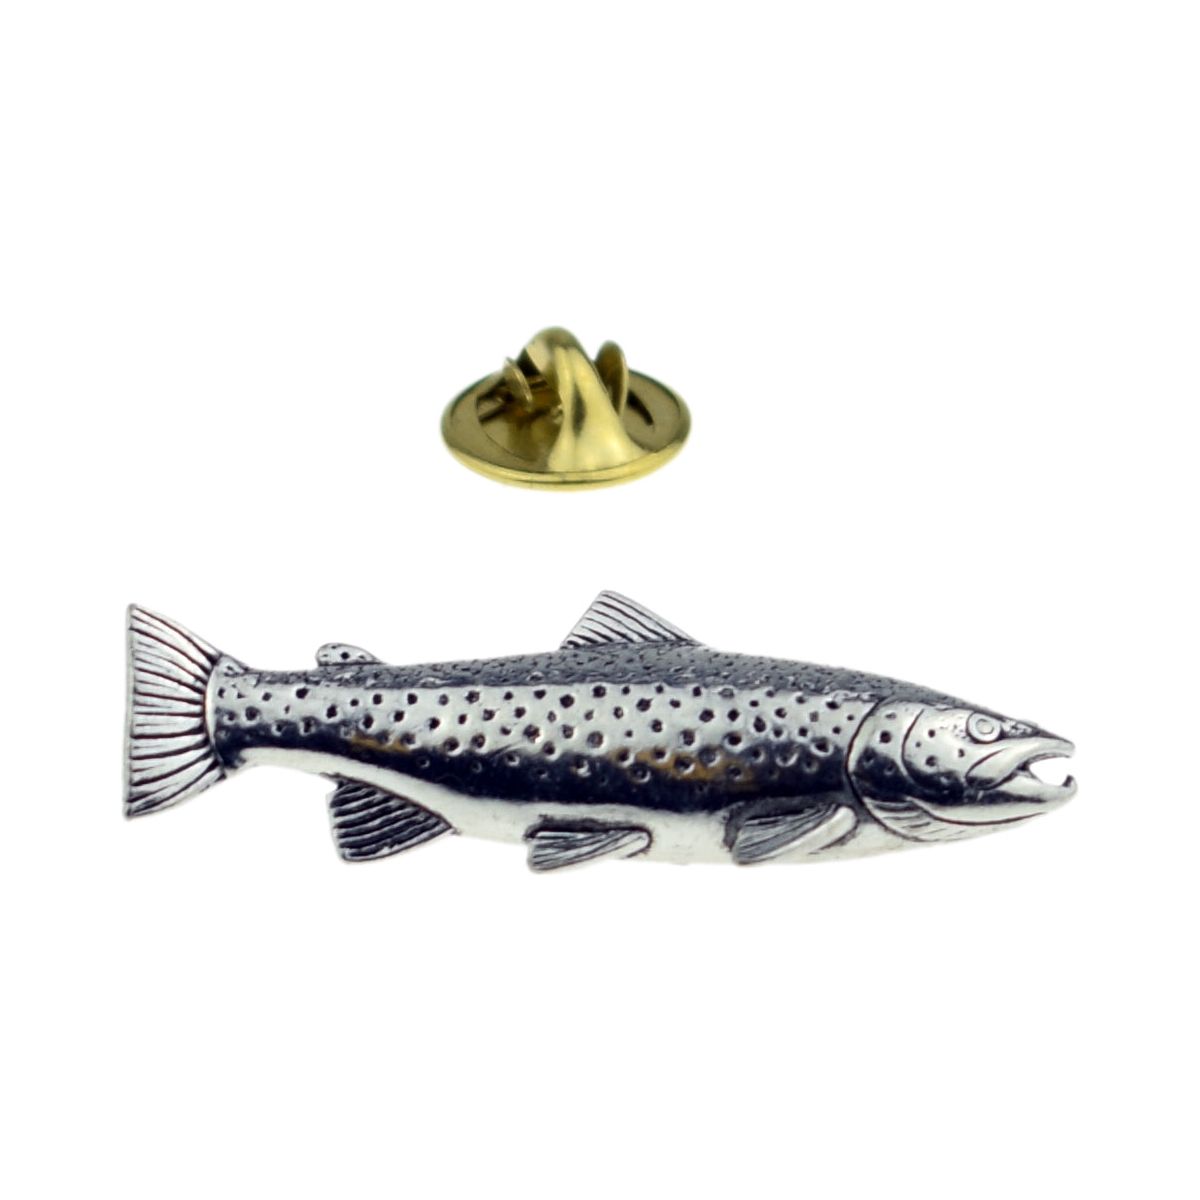 Brown Trout Fish Pewter Lapel Pin Badge - Ashton and Finch